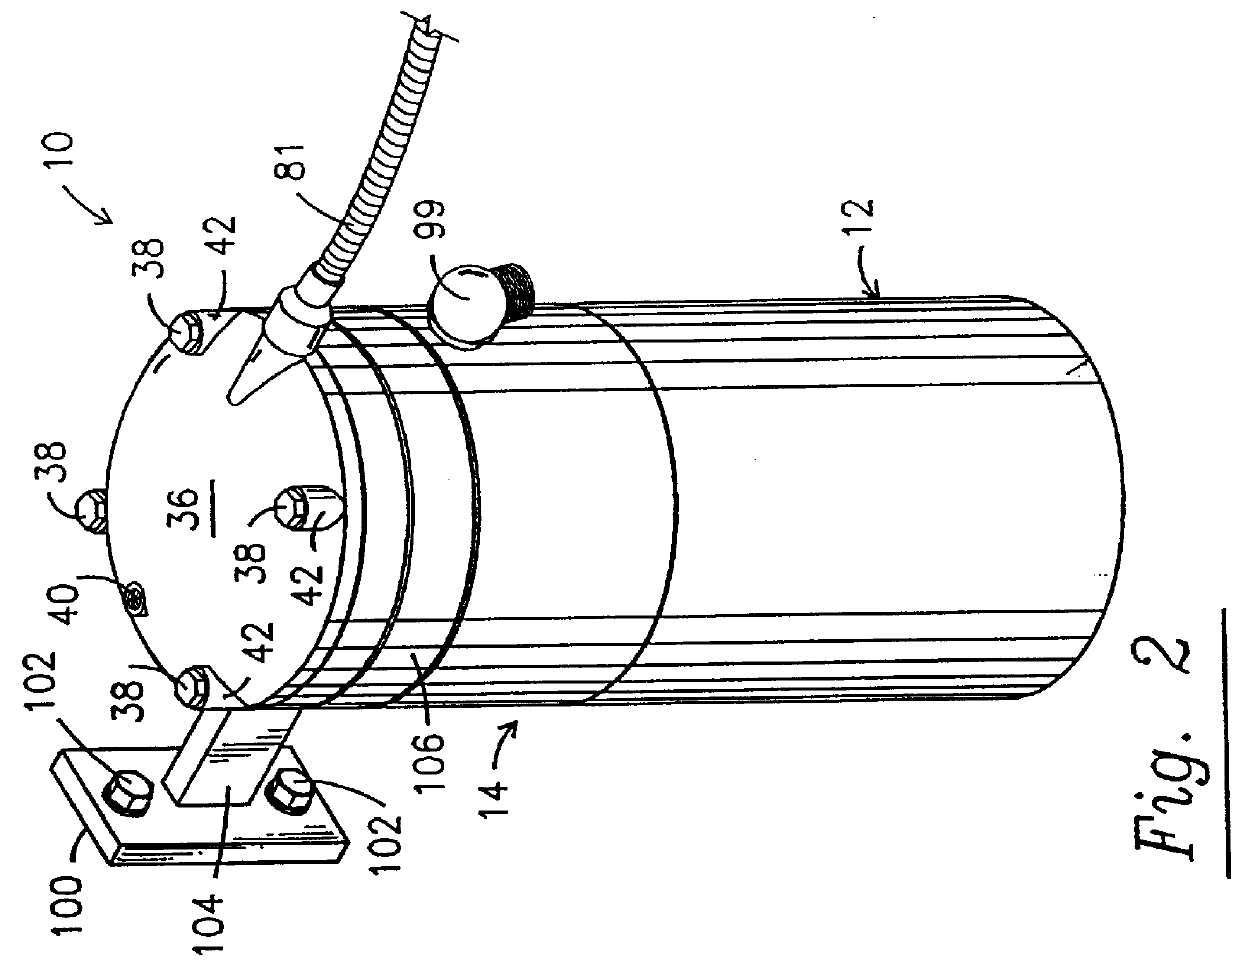 Apparatus for removing solid and volatile contaminants